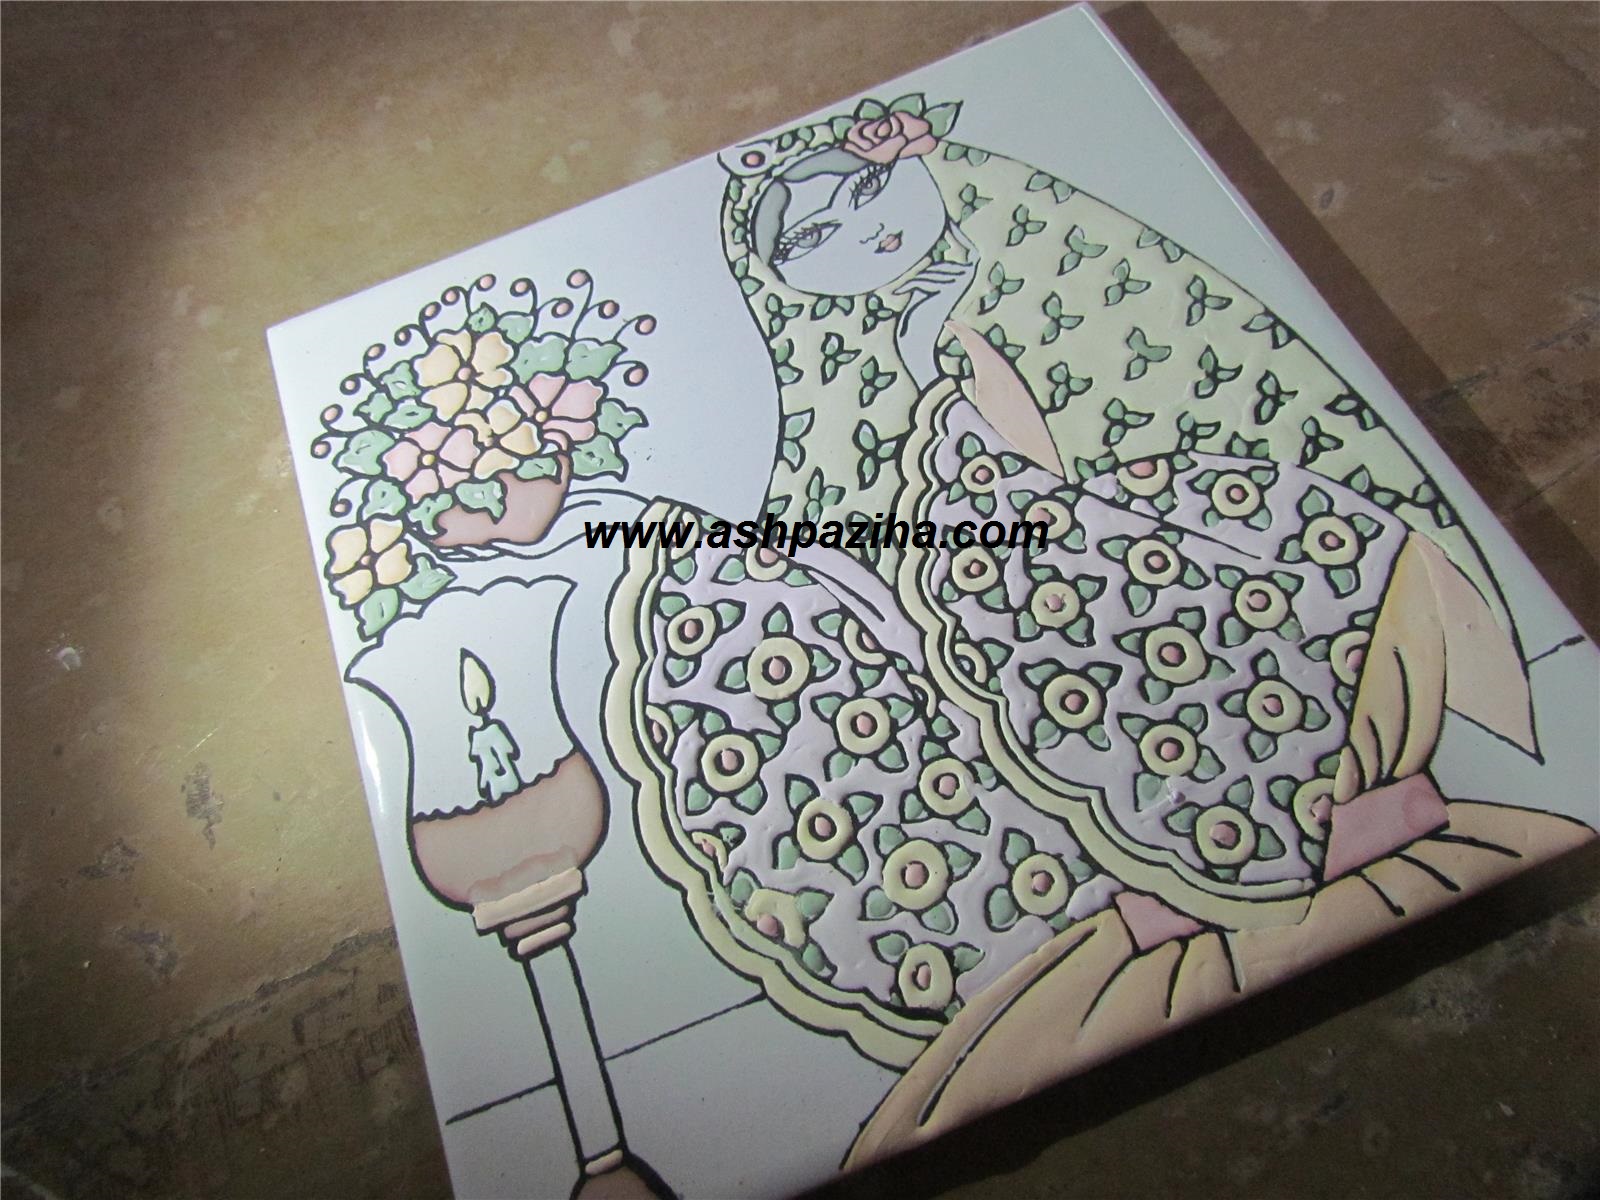 Educational - painting - and - designing - the - Tiles (16)